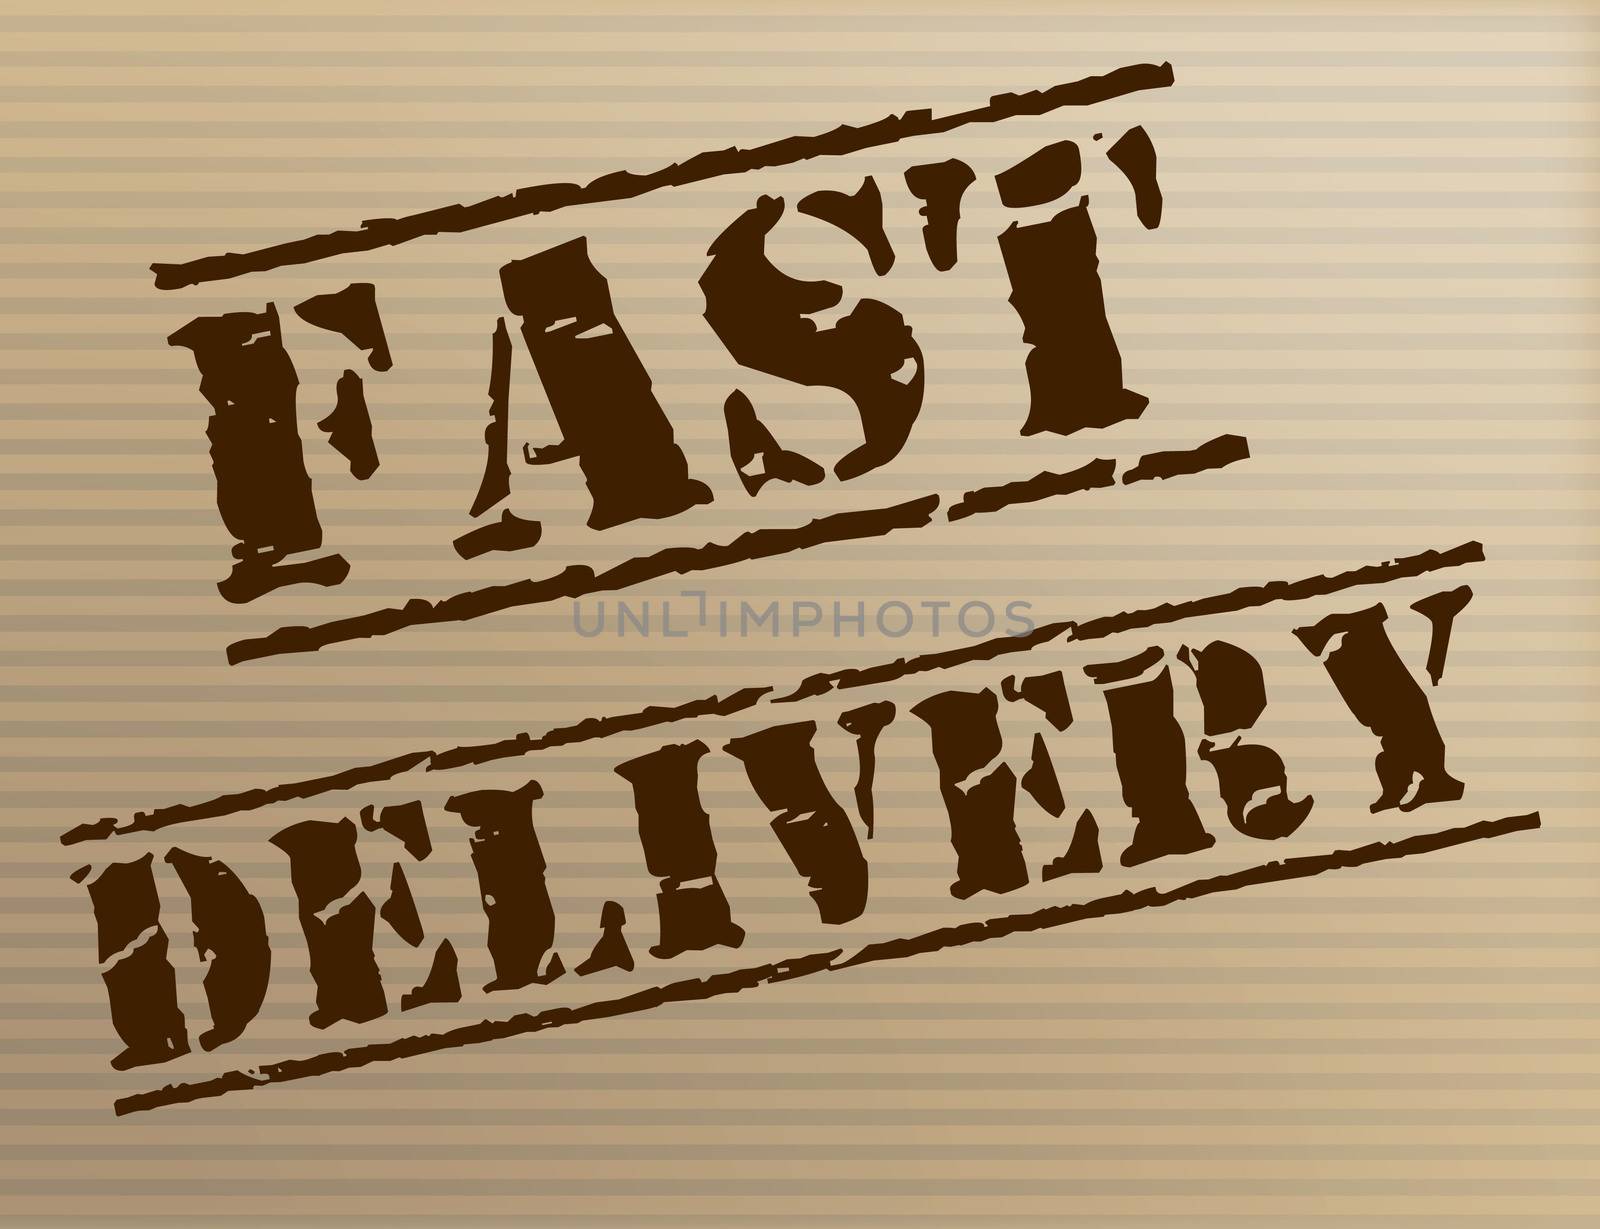 Fast Delivery Means High Speed And Action by stuartmiles